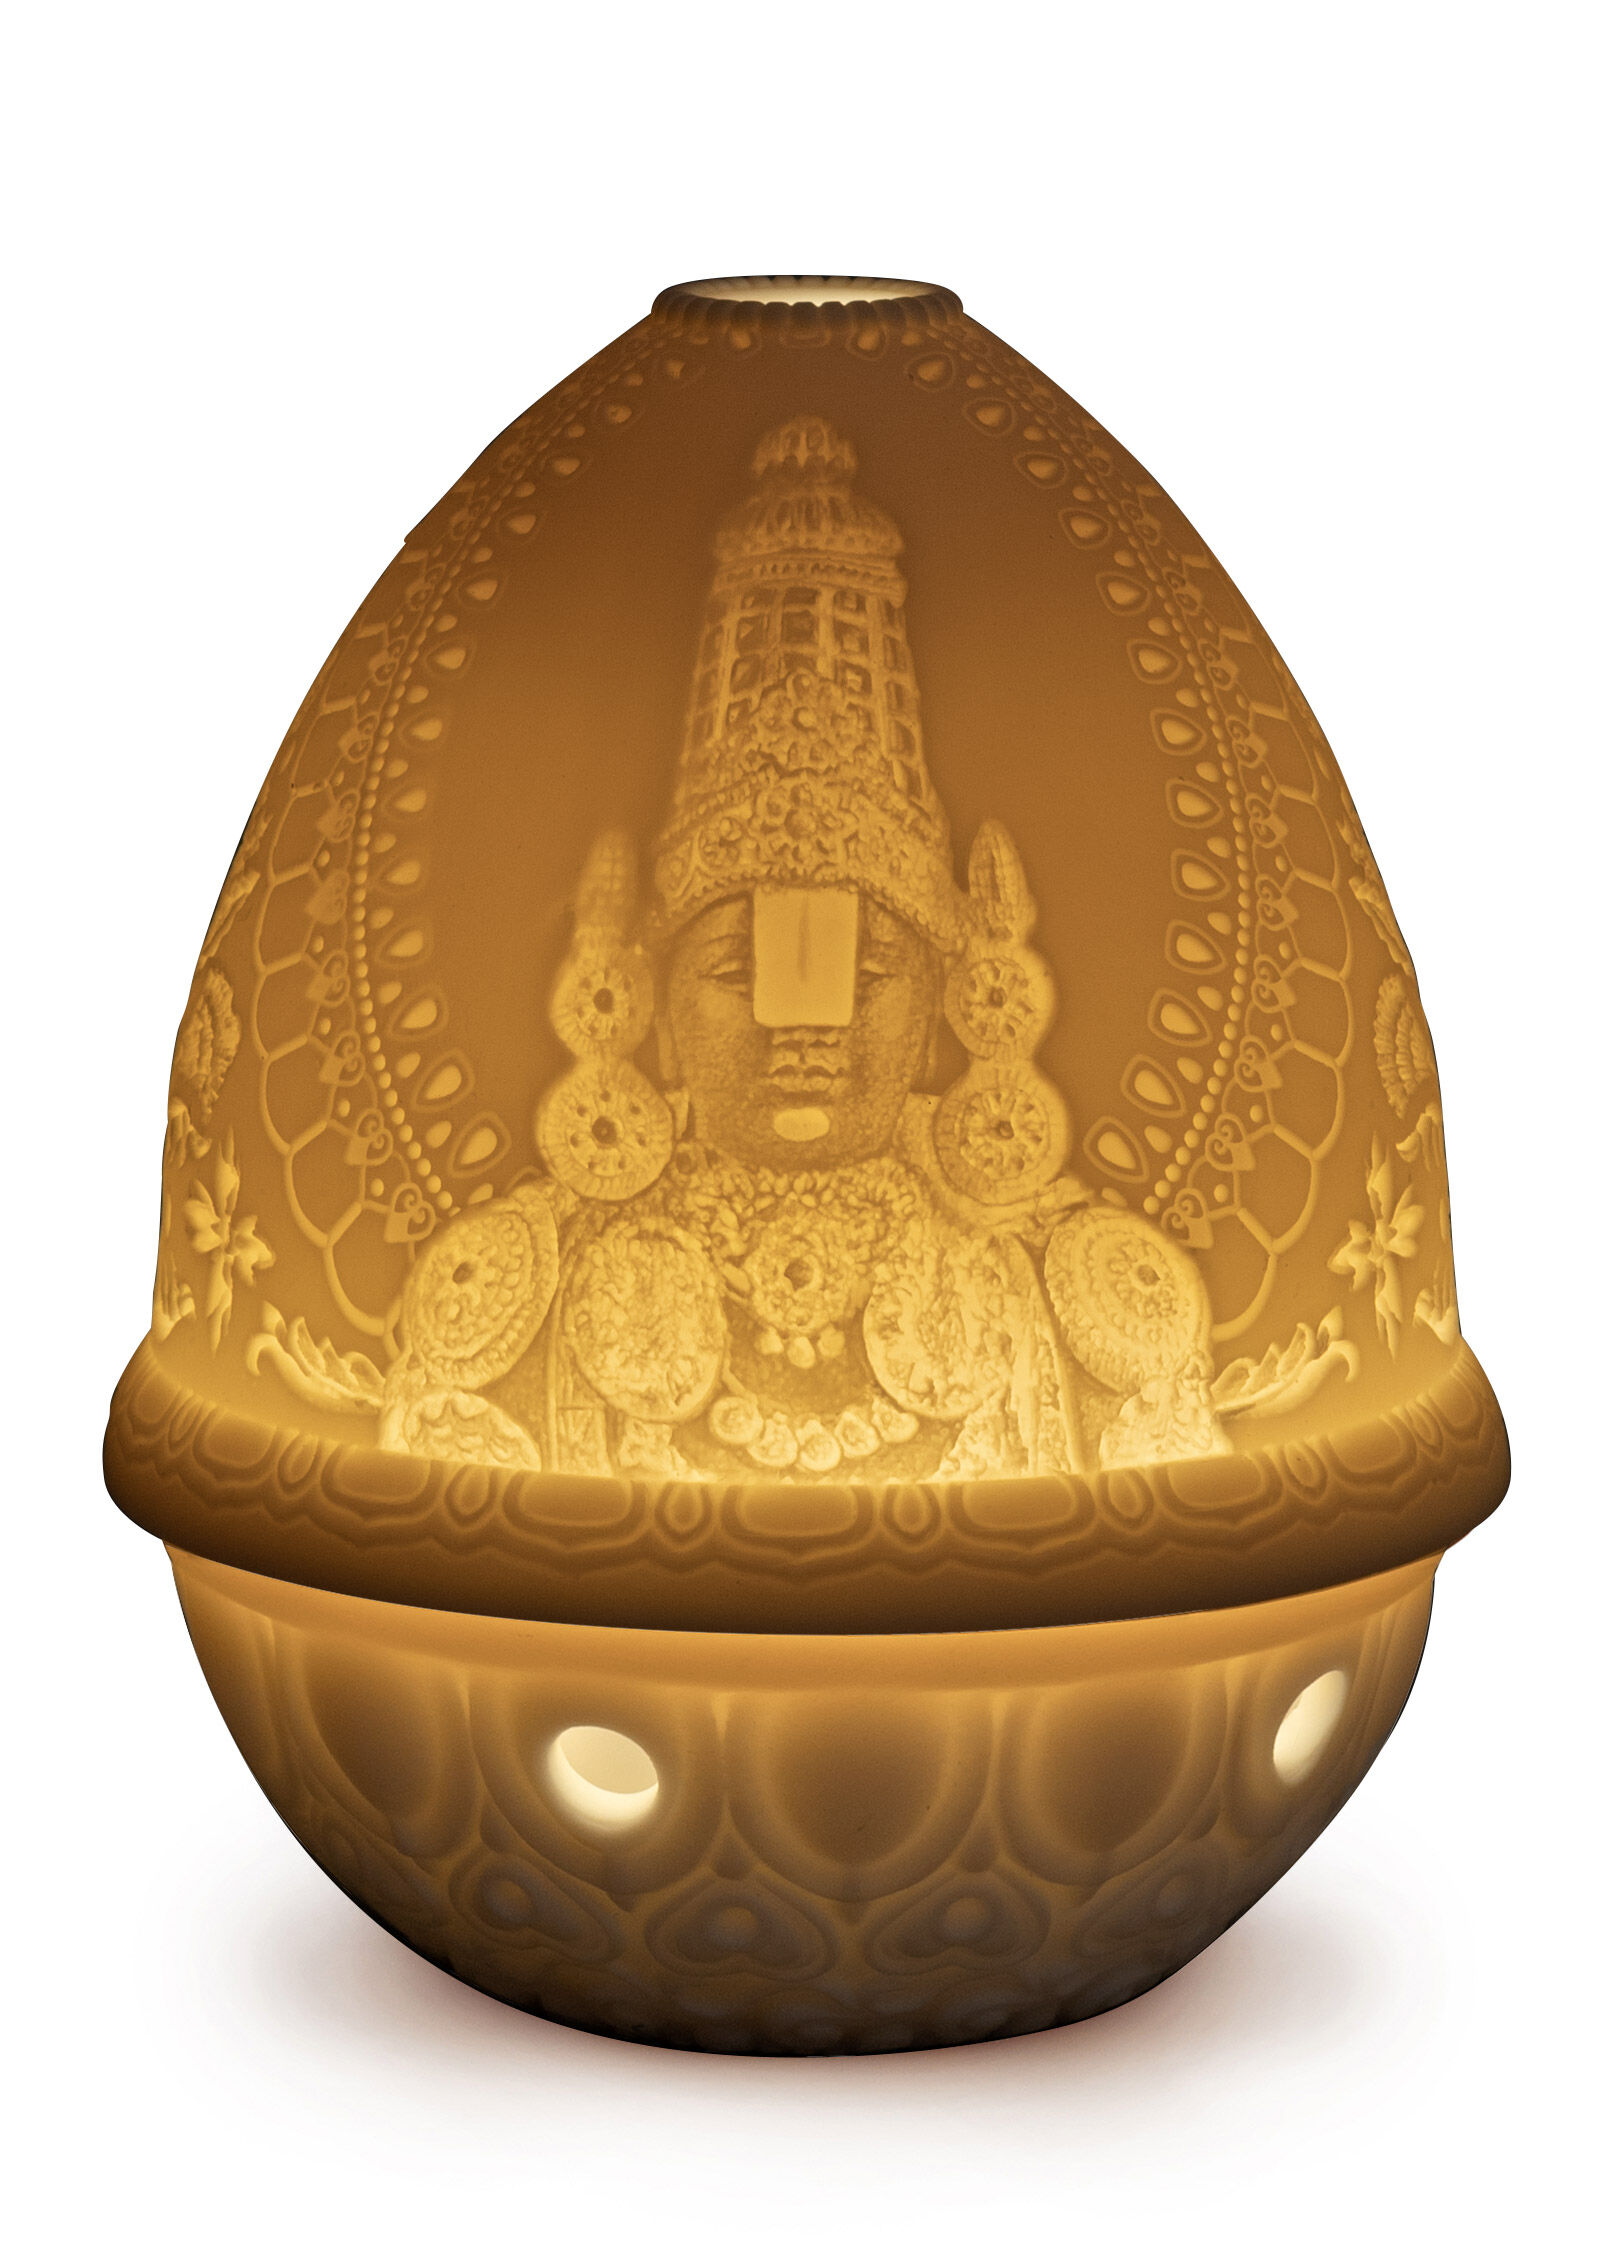 lladro-lord-balaji-lithophane-with-rechargeable-led-light-3.5x3.5x4.7-in-01017456.jpg